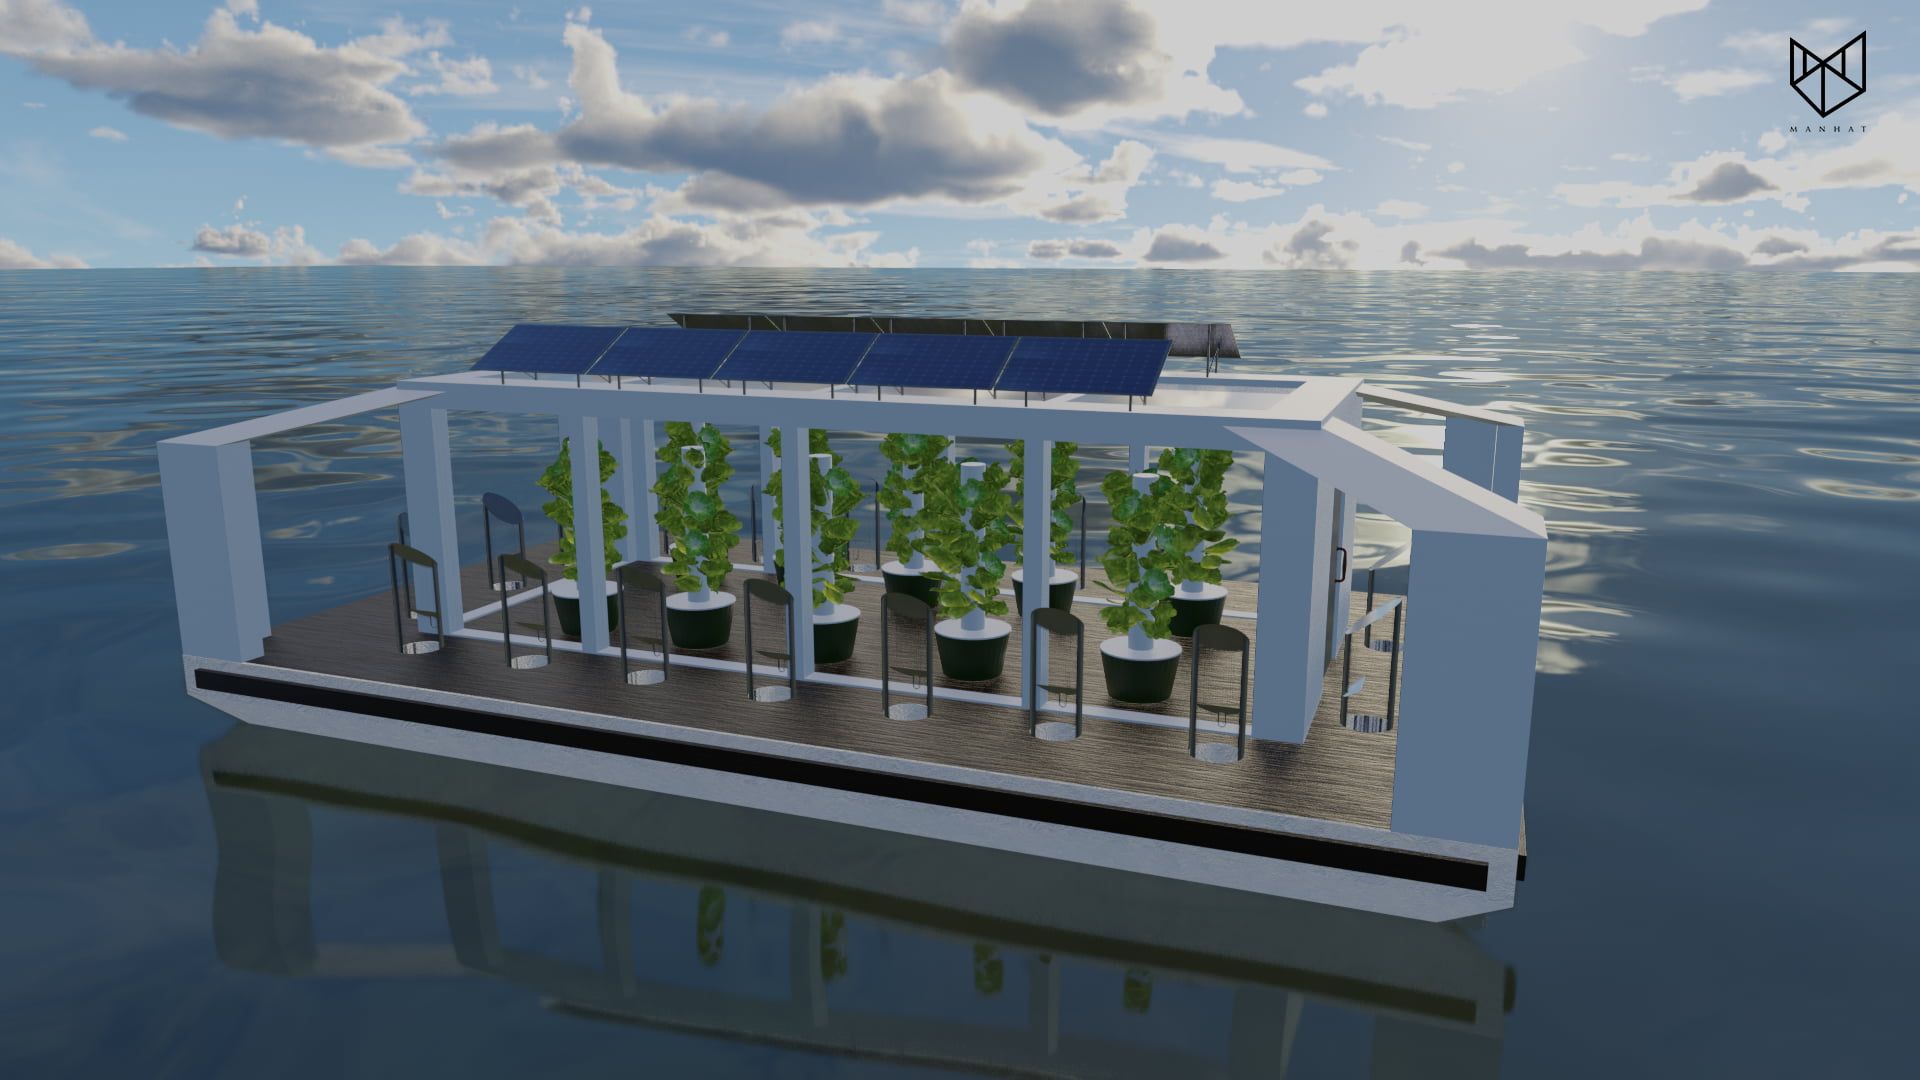 A platform in the middle of the ocean with plants and an irrigation system attached, including solar panels on the roof of the farm. 